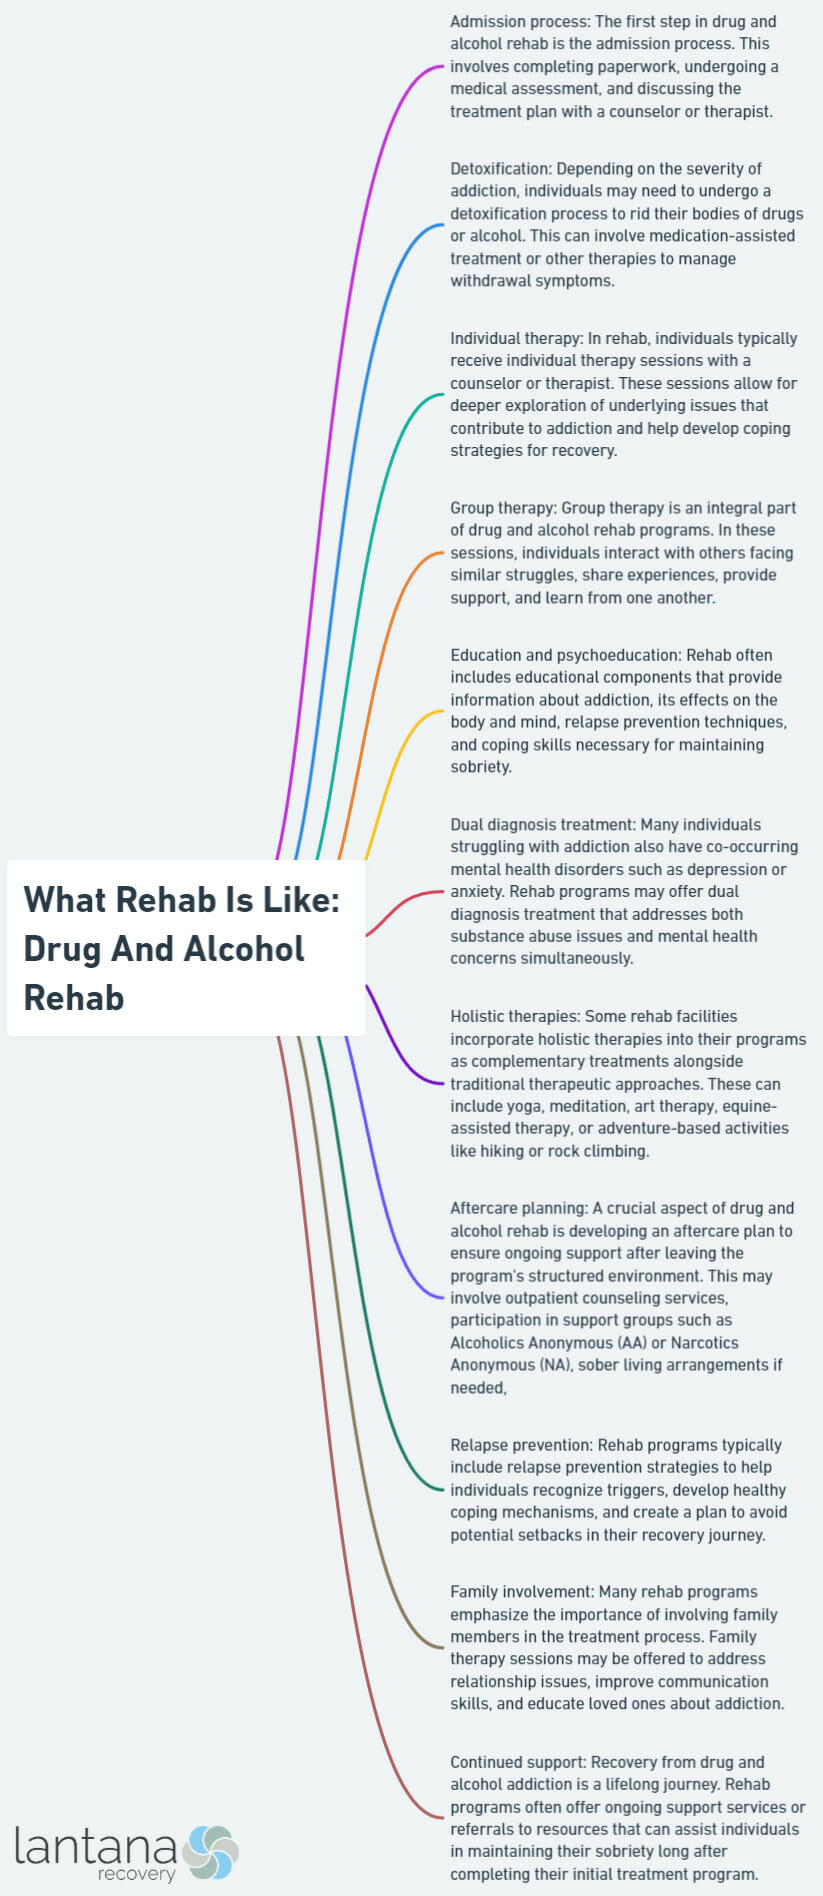 What Rehab Is Like: Drug And Alcohol Rehab
